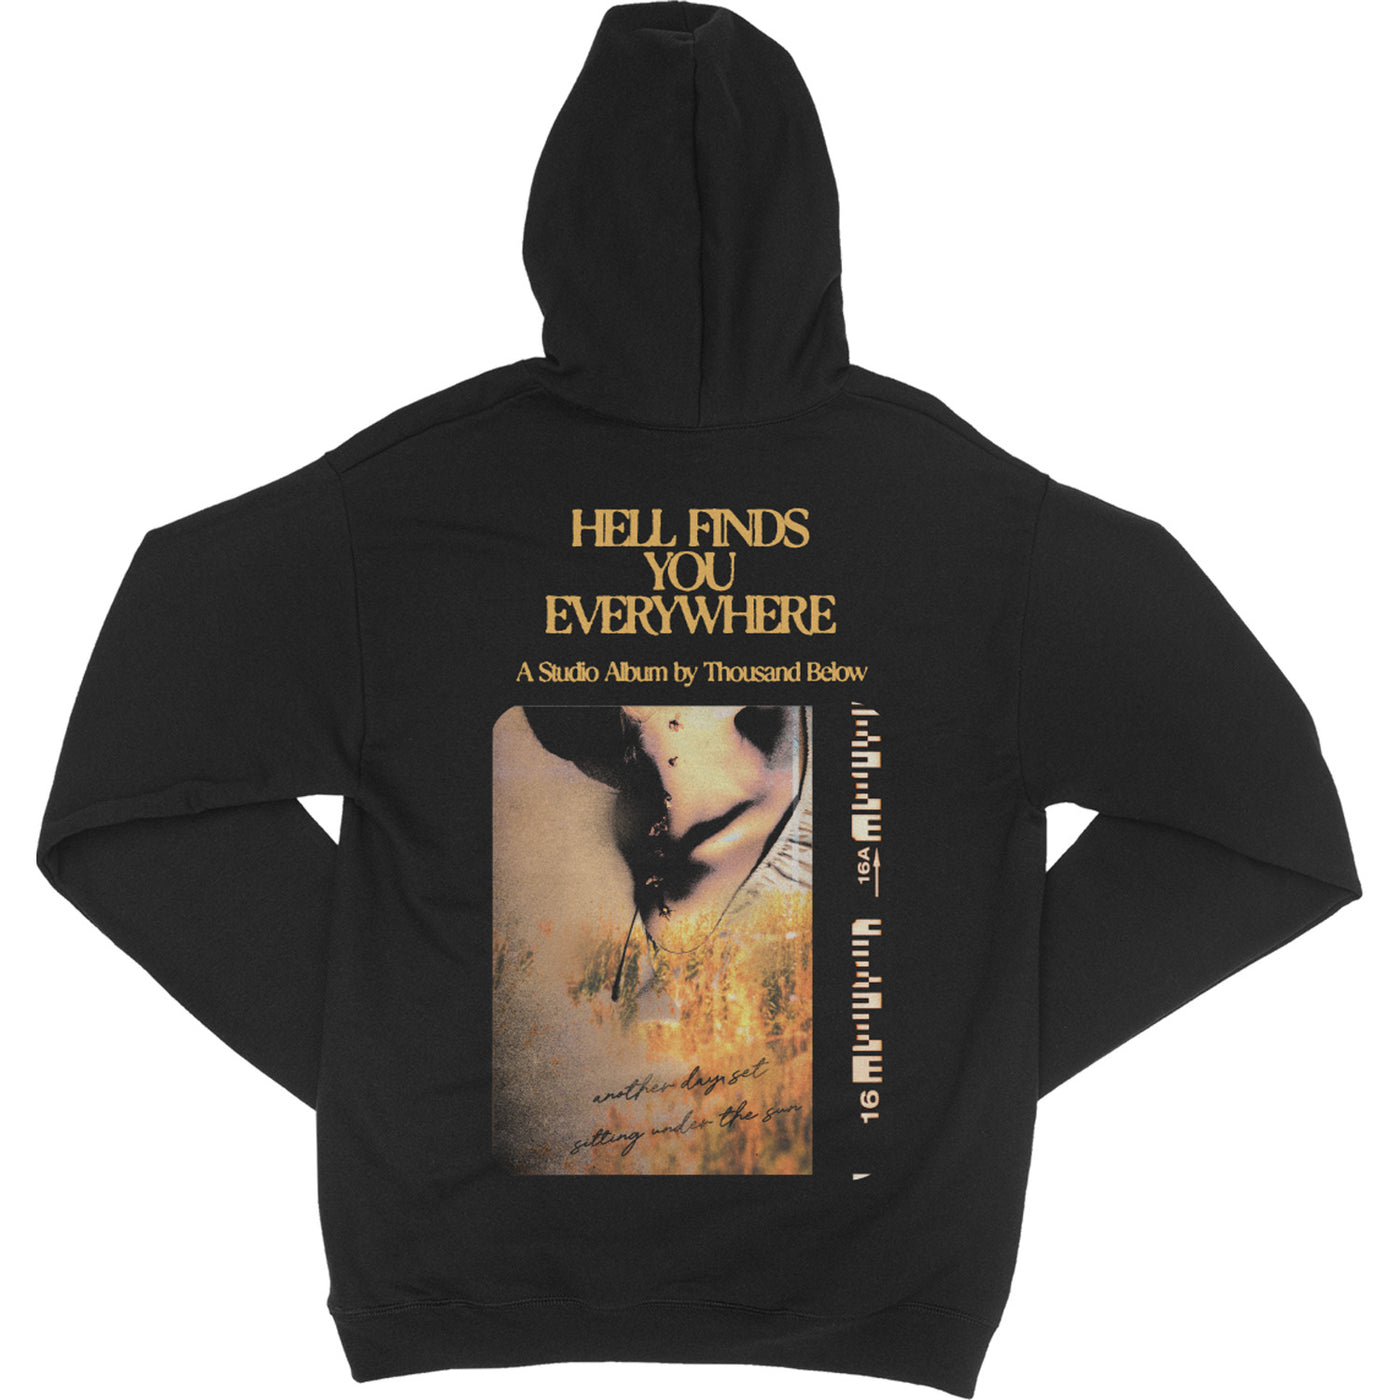 back of black pullover hoodie with yellow text "hell finds you everywhere a studio album by thousand below" at the top with an image of burned camera film underneath 